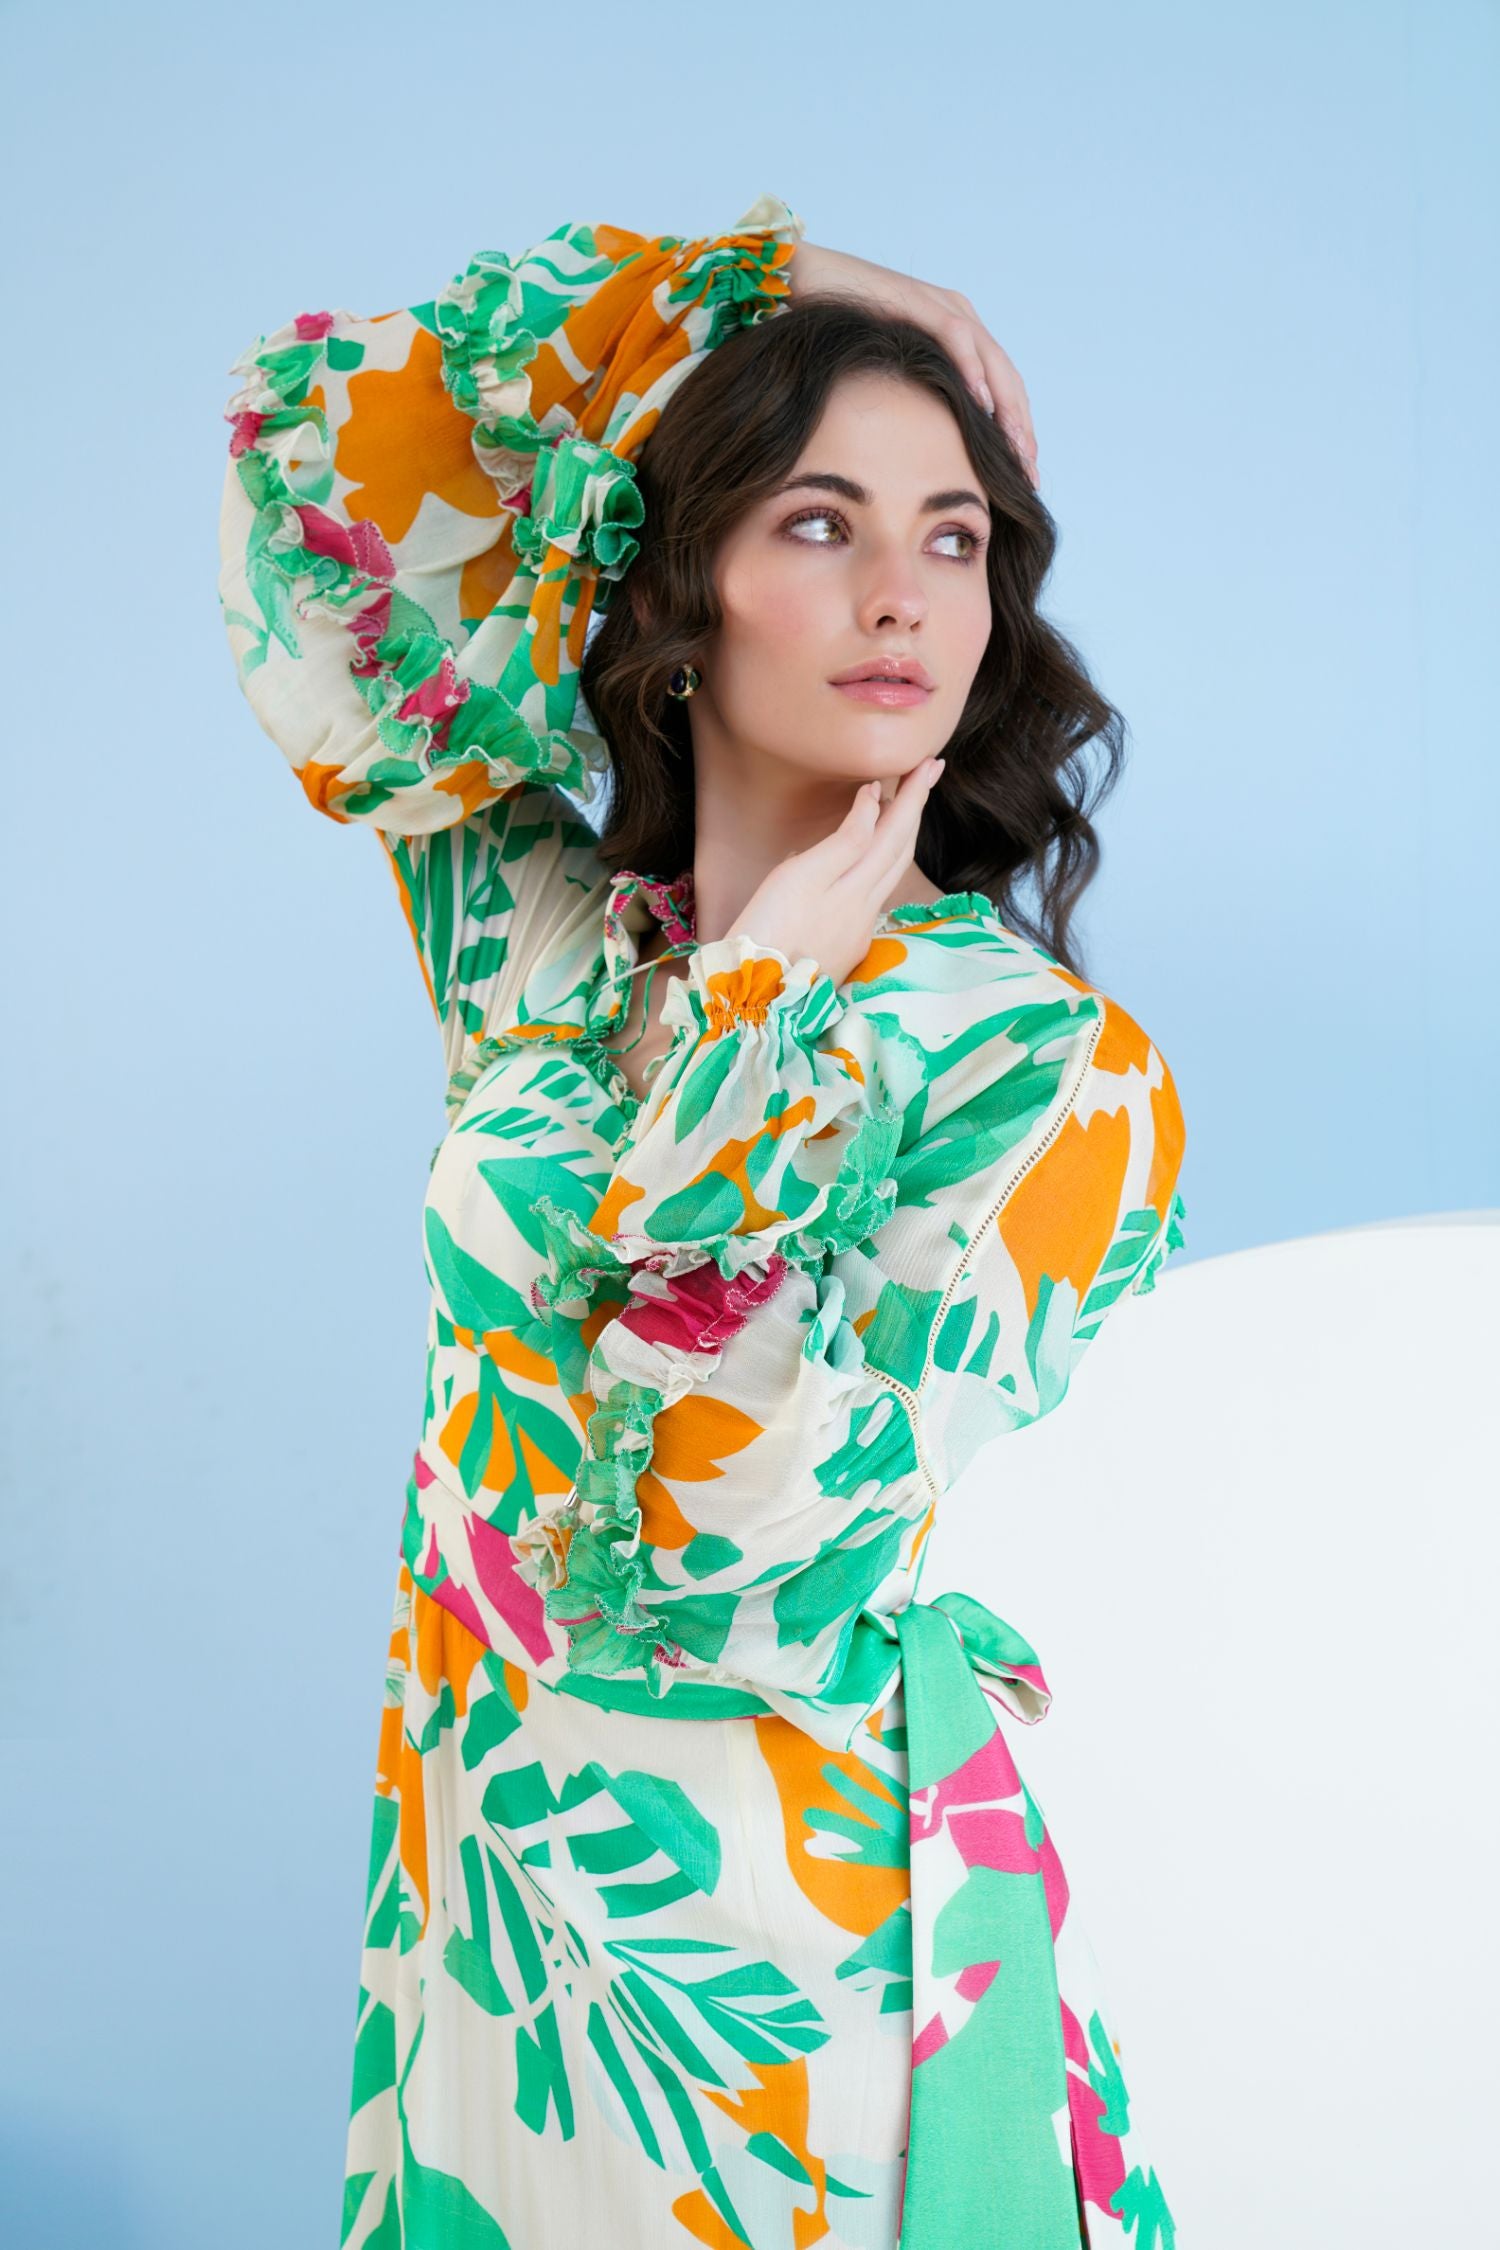 Printed High Low Dress With Frilled Puff Sleeves And
Constructed Yoke